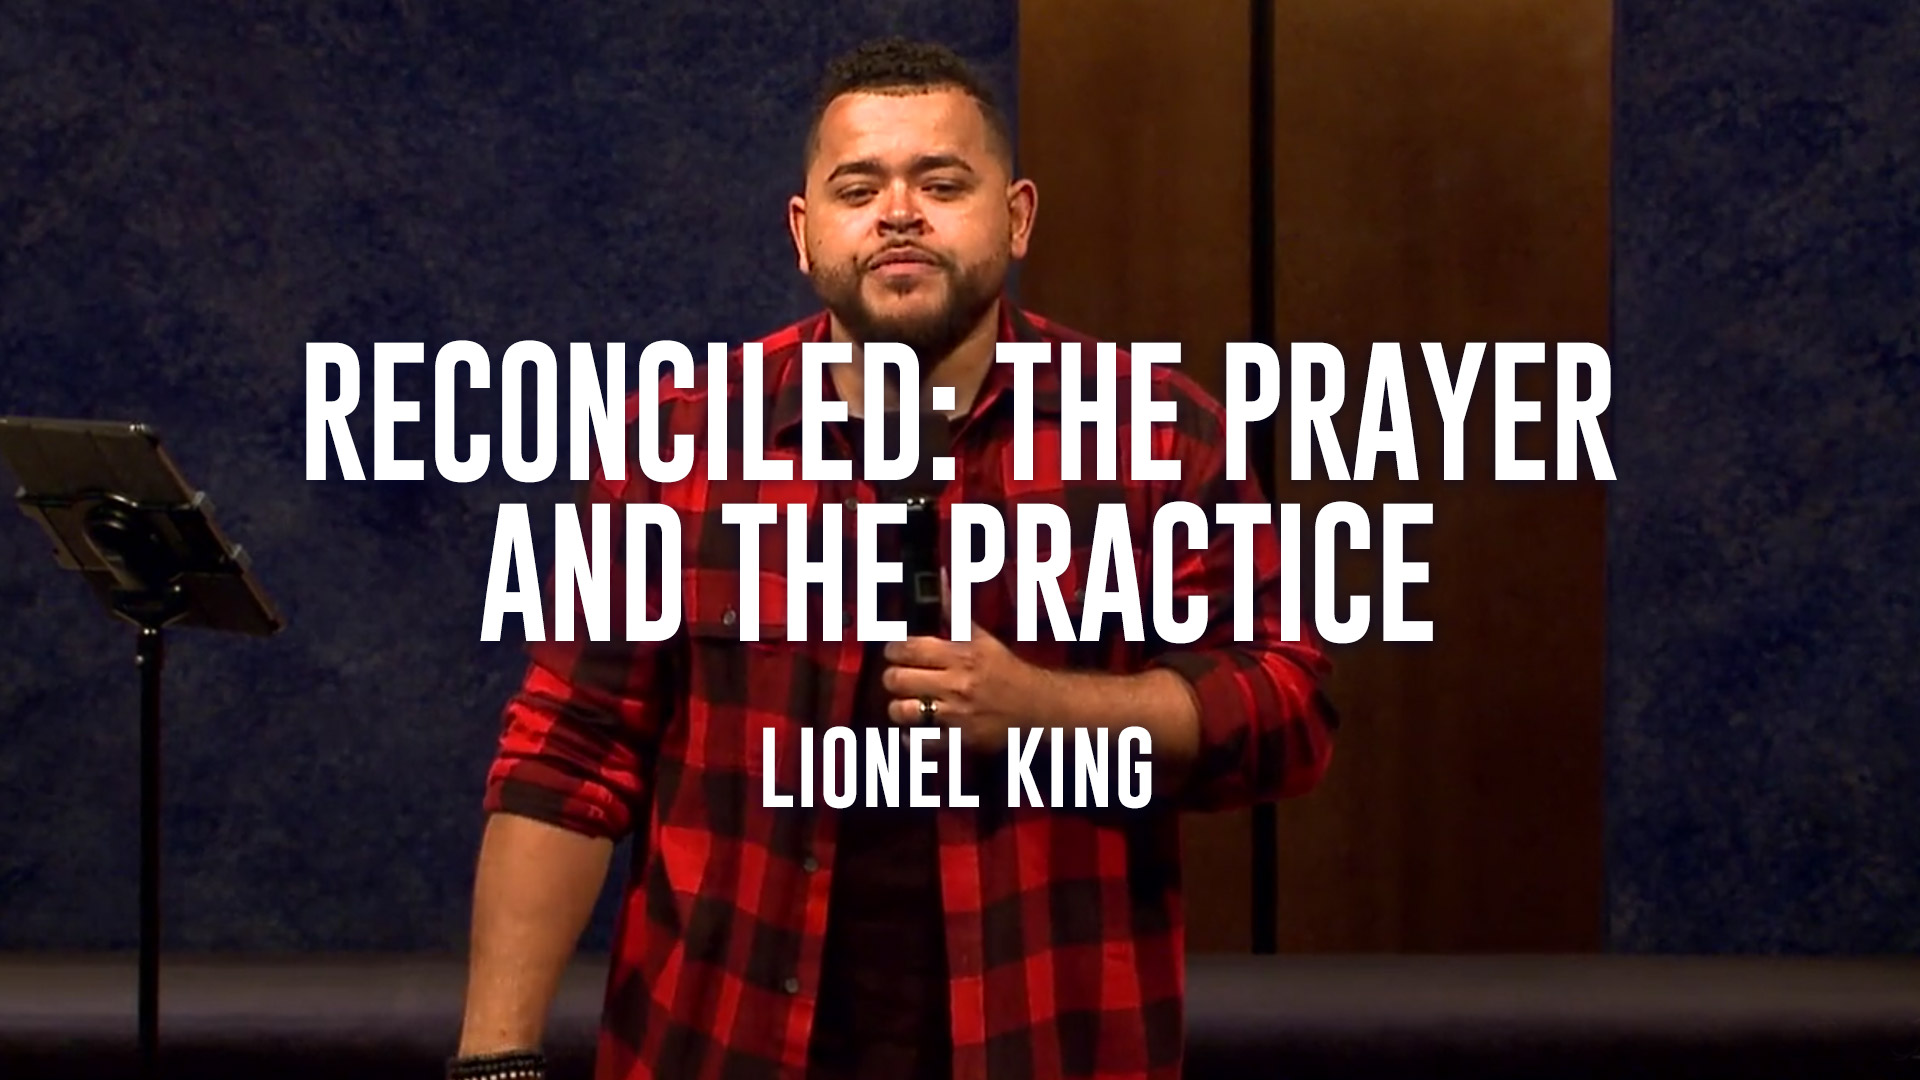 Reconciled: The Prayer and The Practice